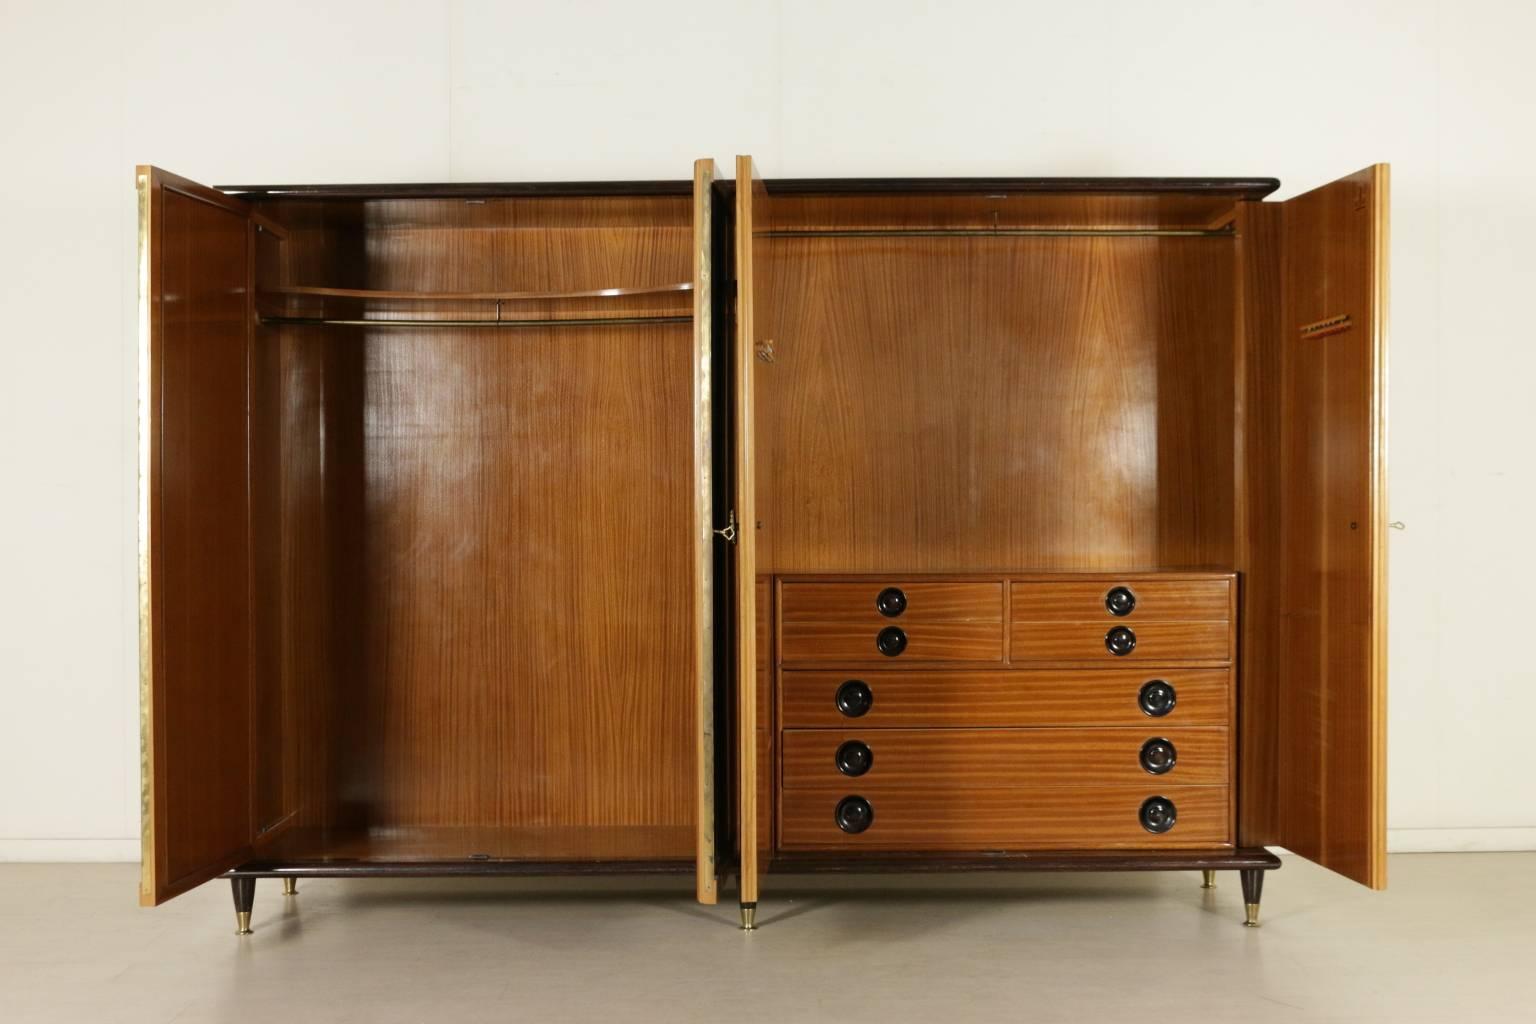 A wardrobe, burl and rosewood veneer, mirror, brass handles and tips. Manufactured in Italy, 1940s-1950s.